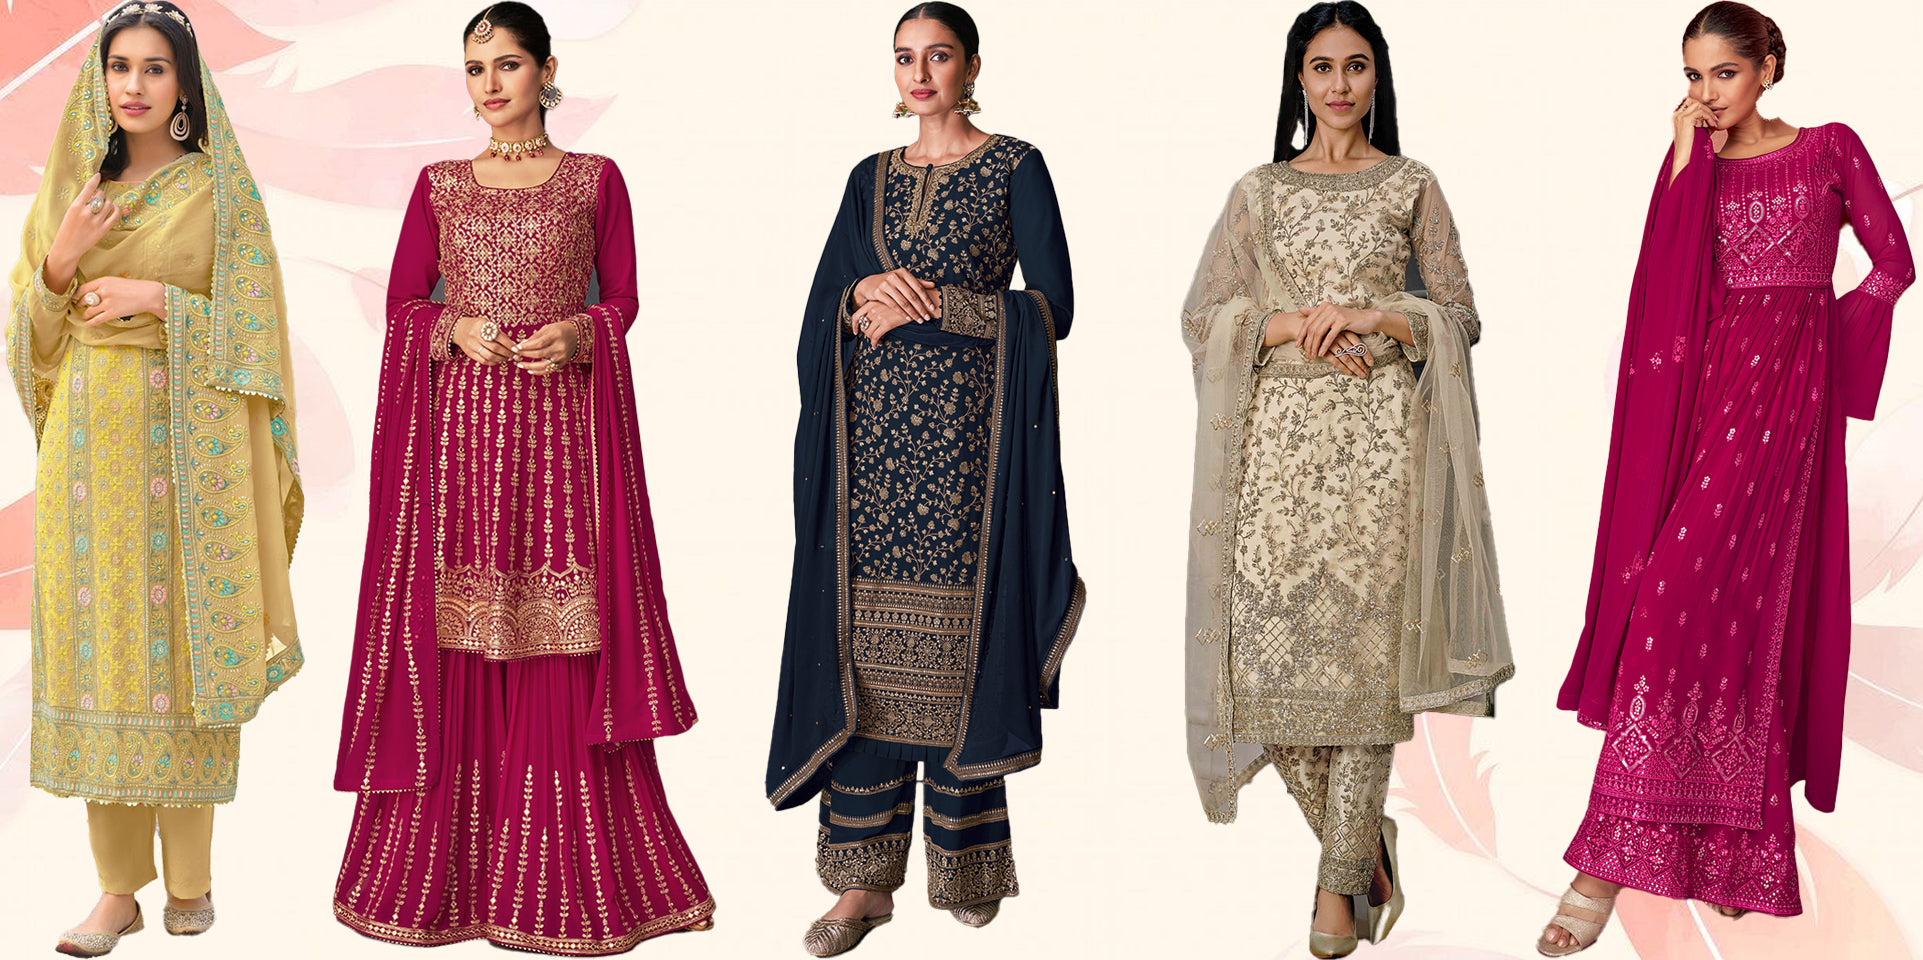 Simple ways to look stylish in your basic salwar kameez | The Times of India